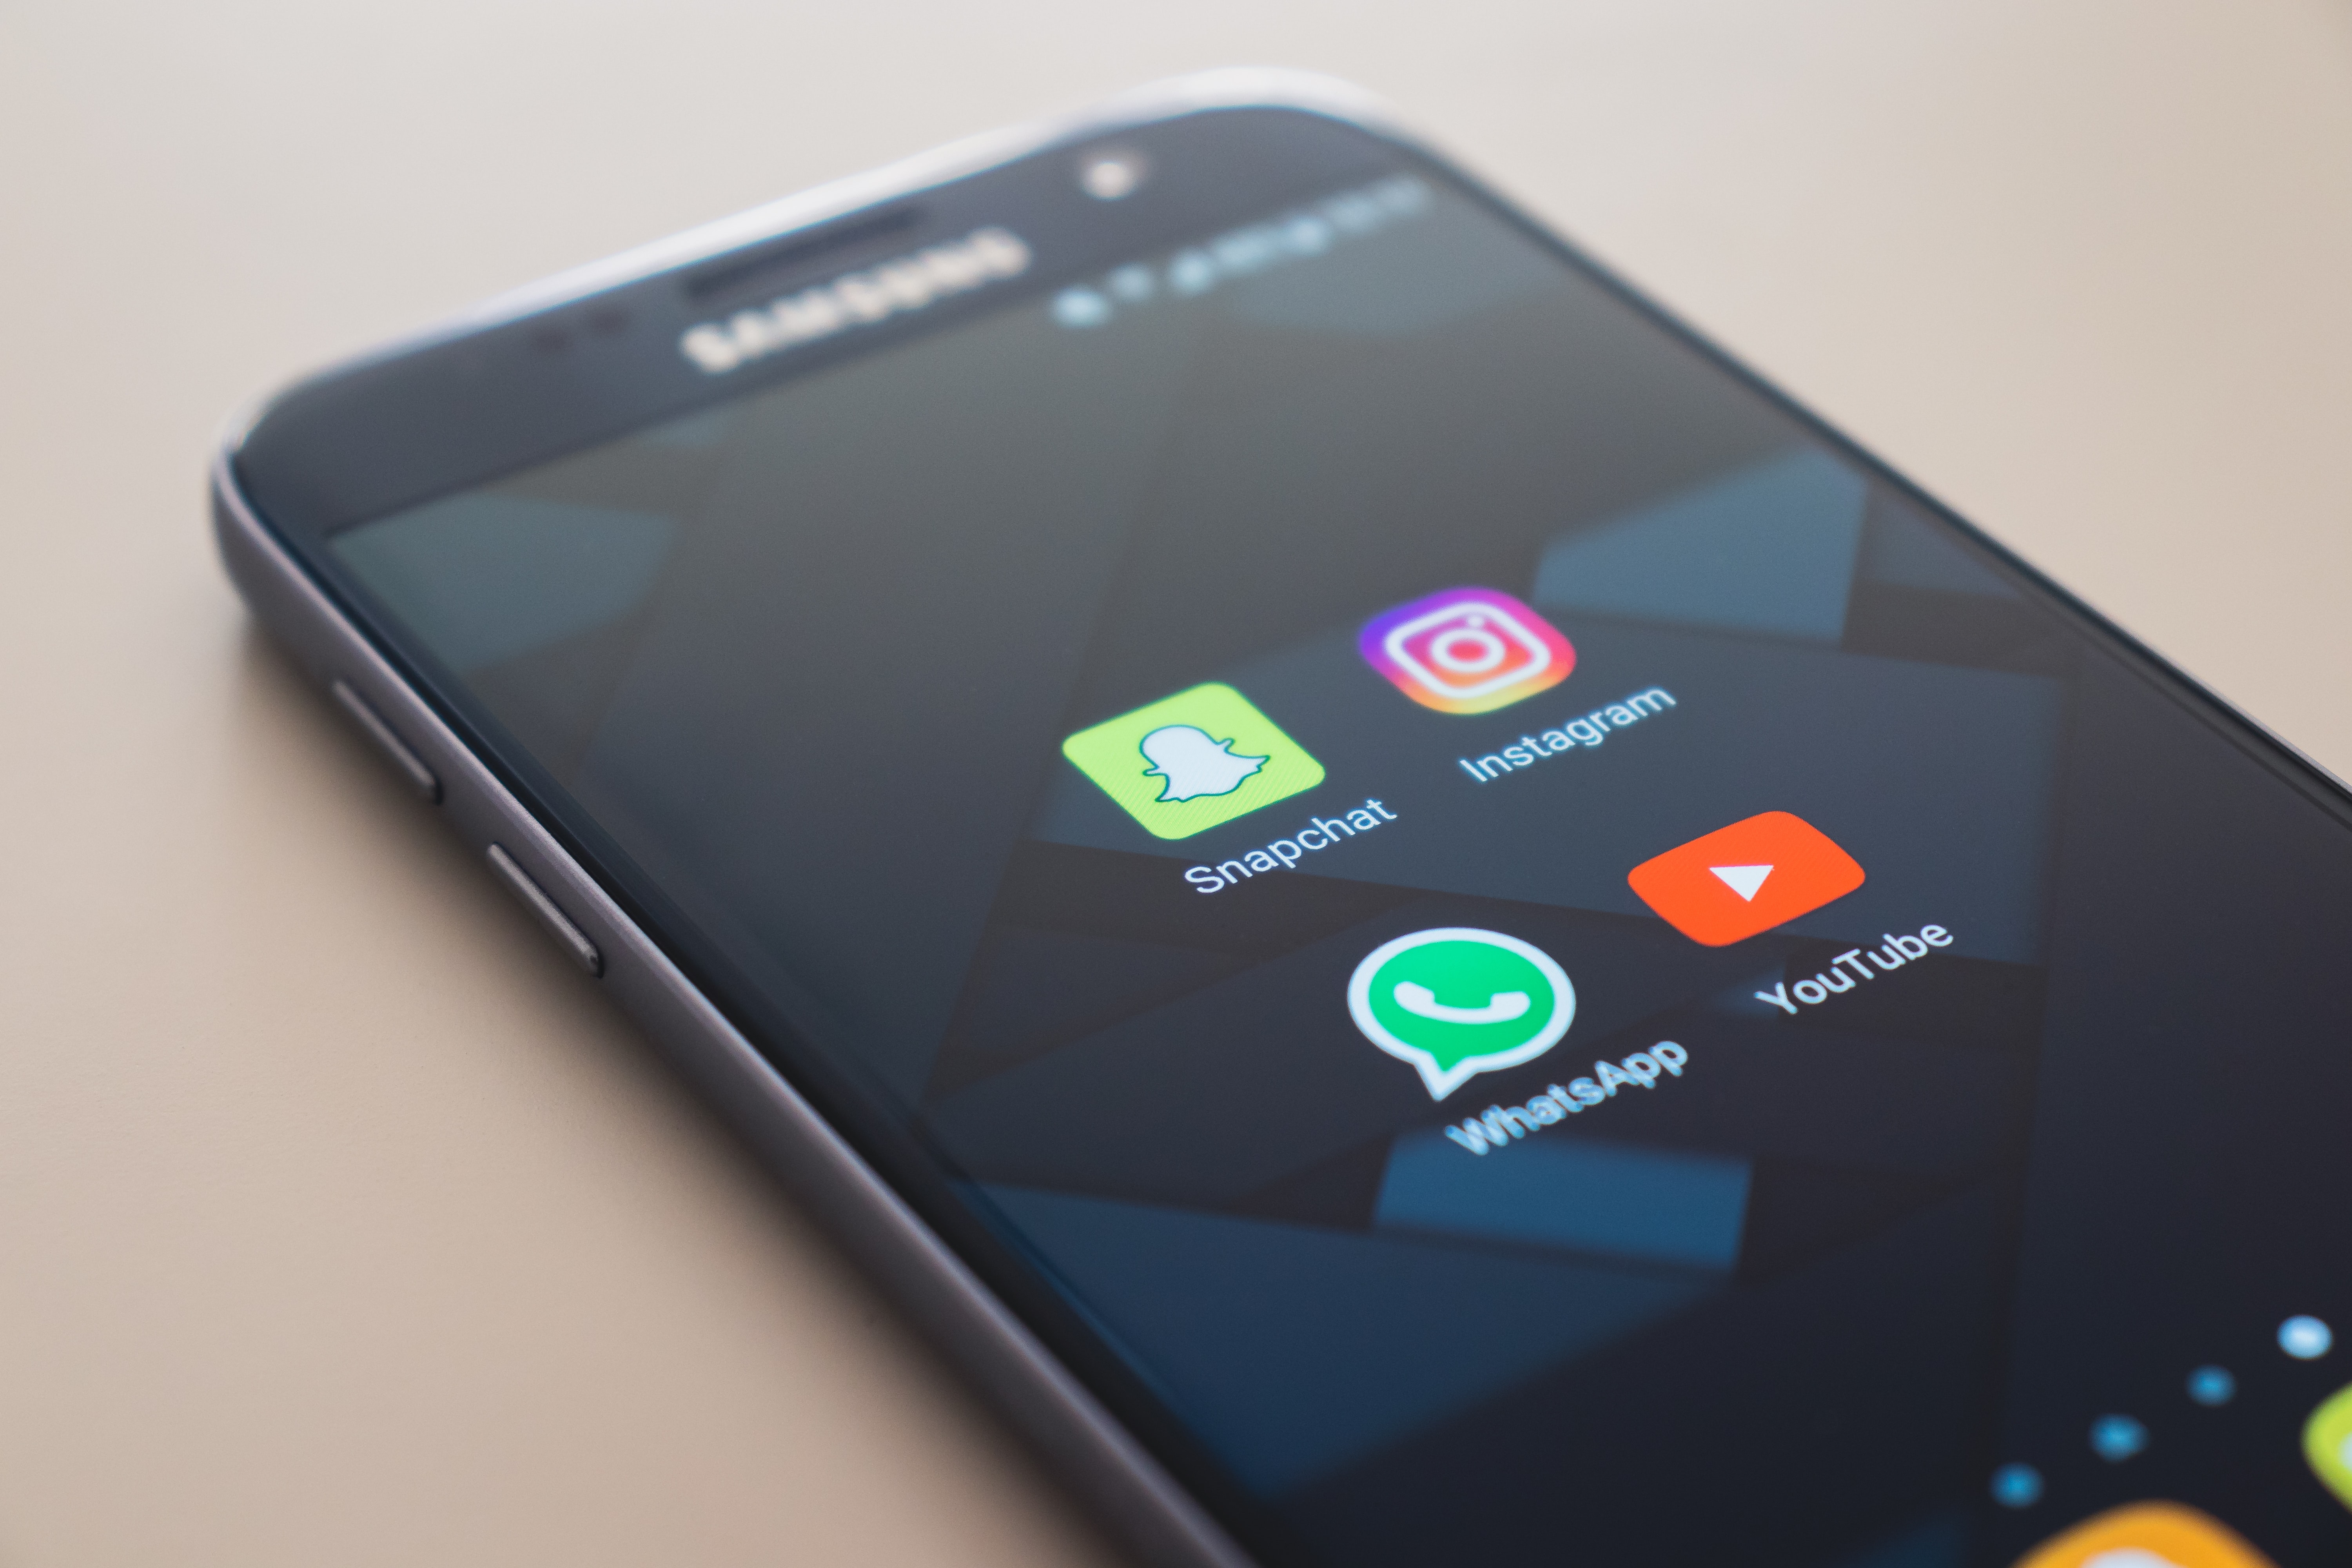 Picture of a Samsung phone with icons including WhatsApp